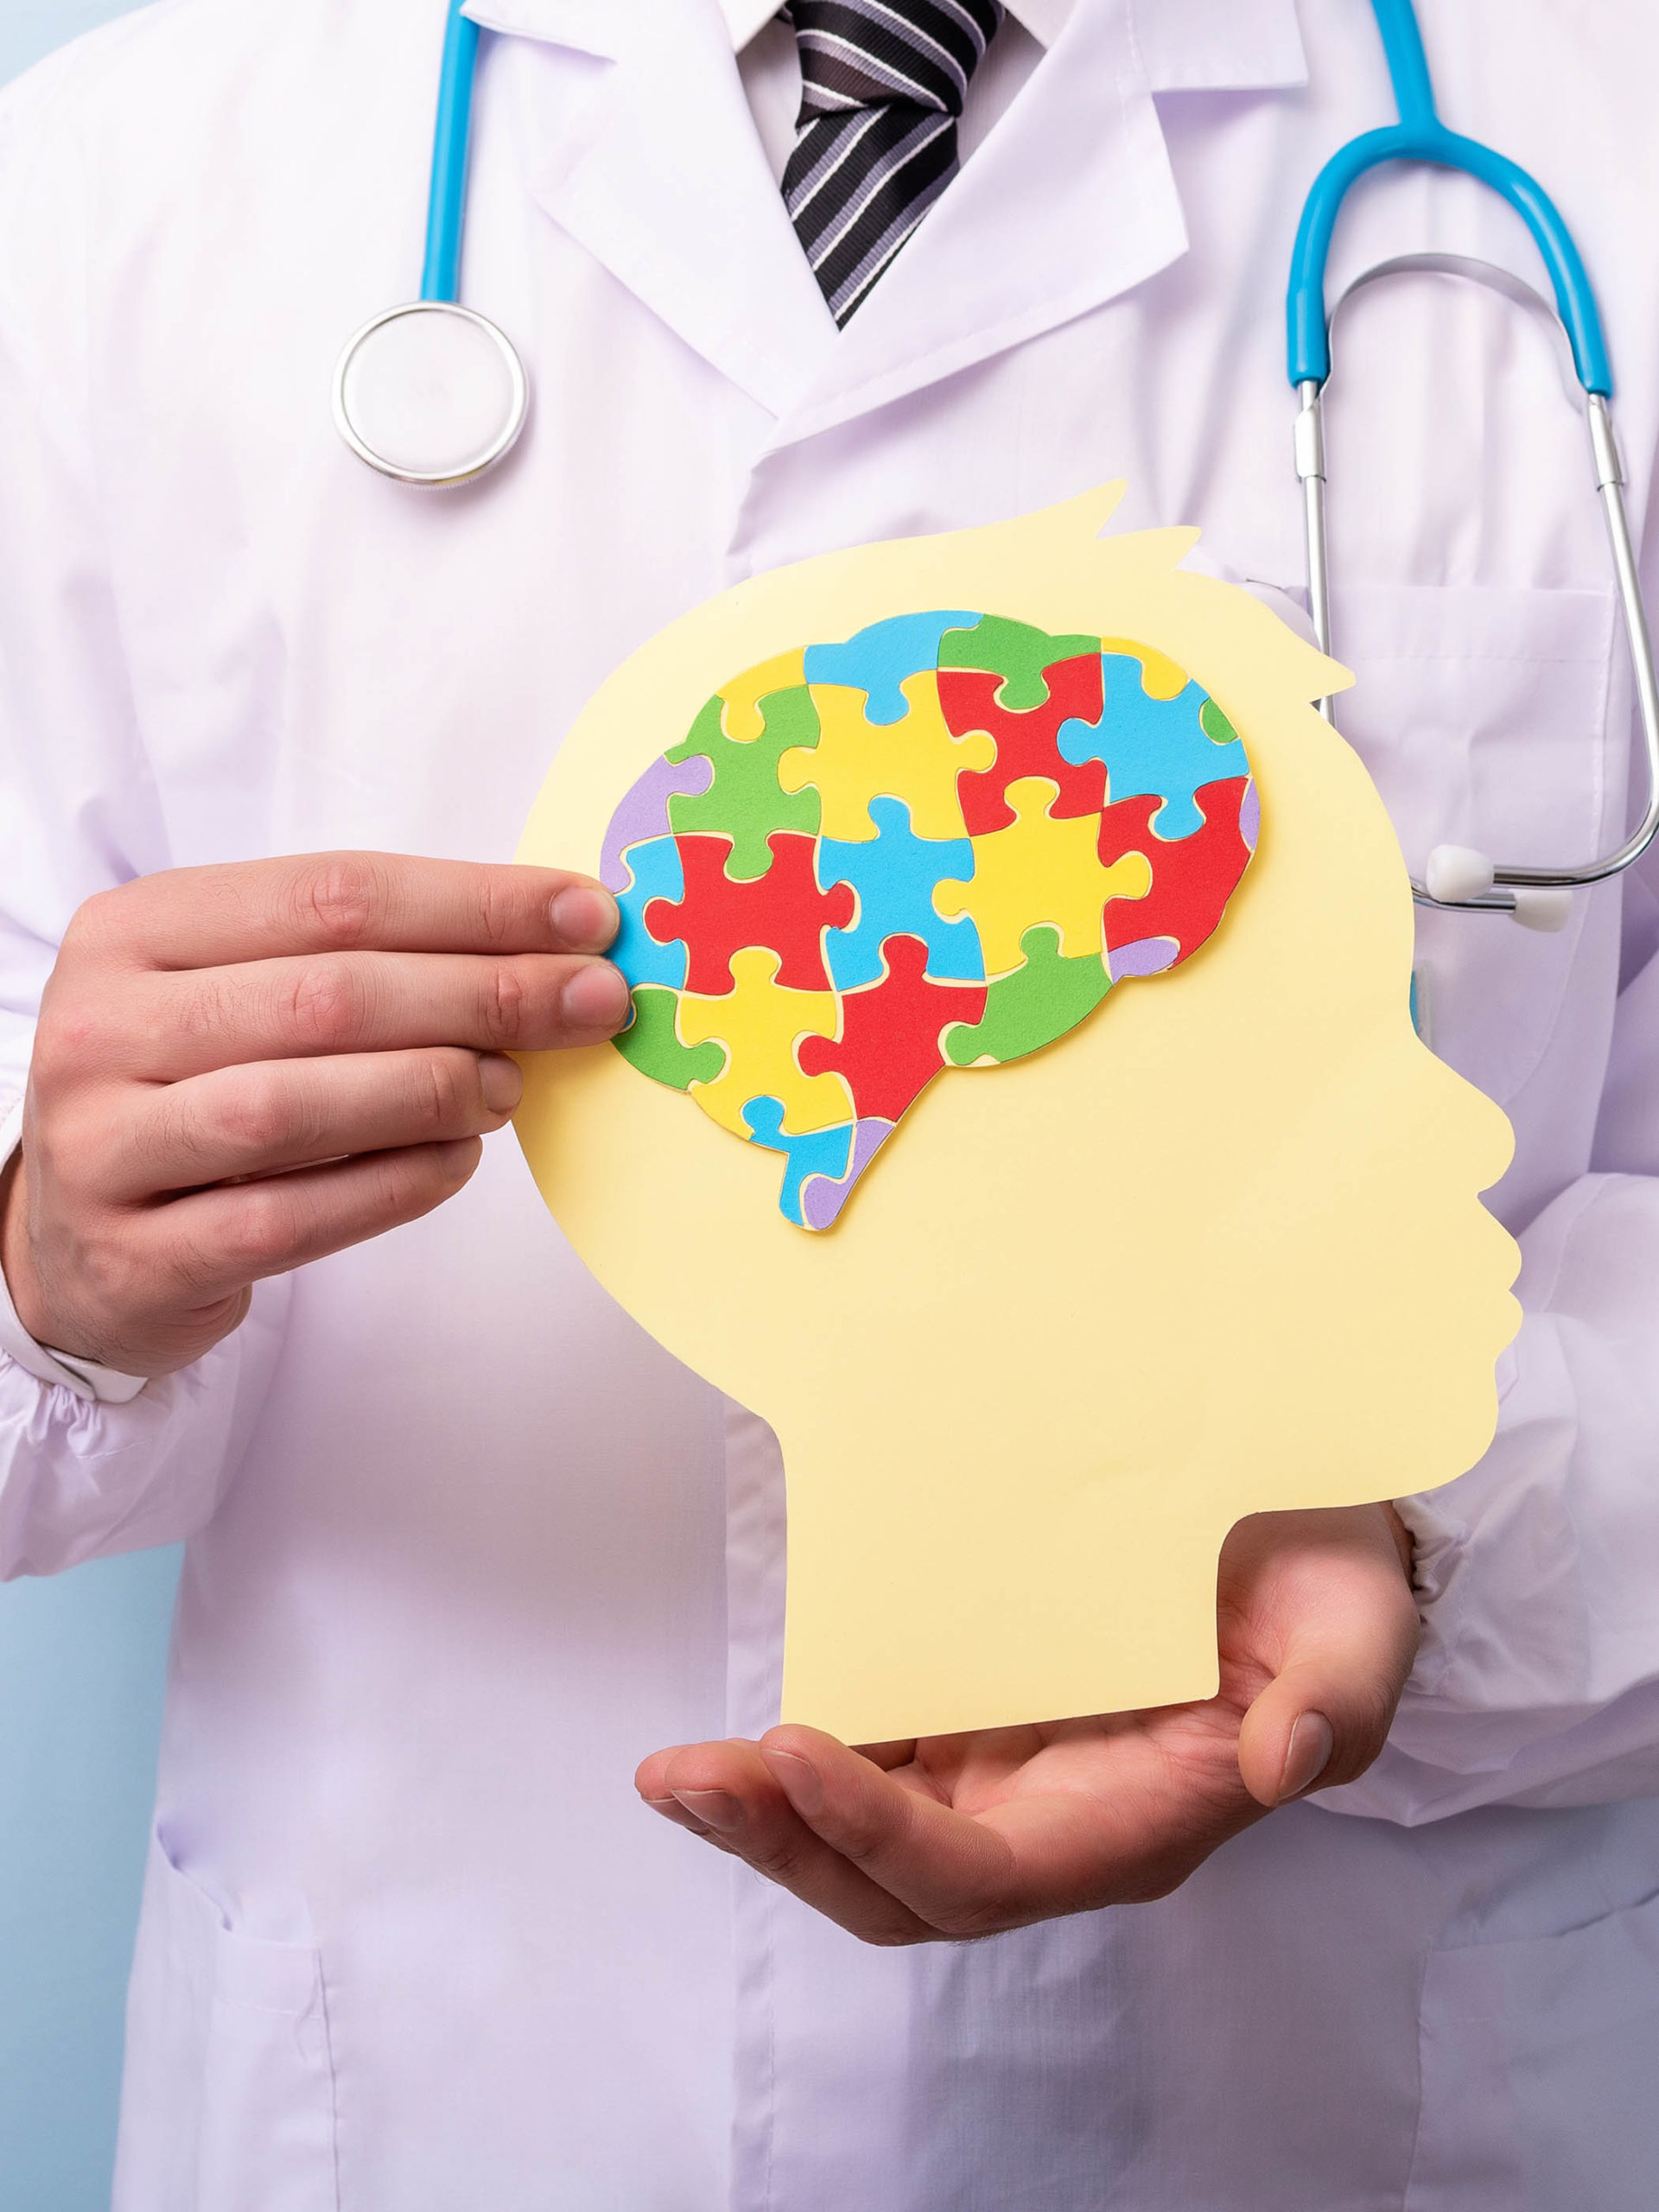 Doctor hands holding head with jigsaw puzzle brain shape to represent autism